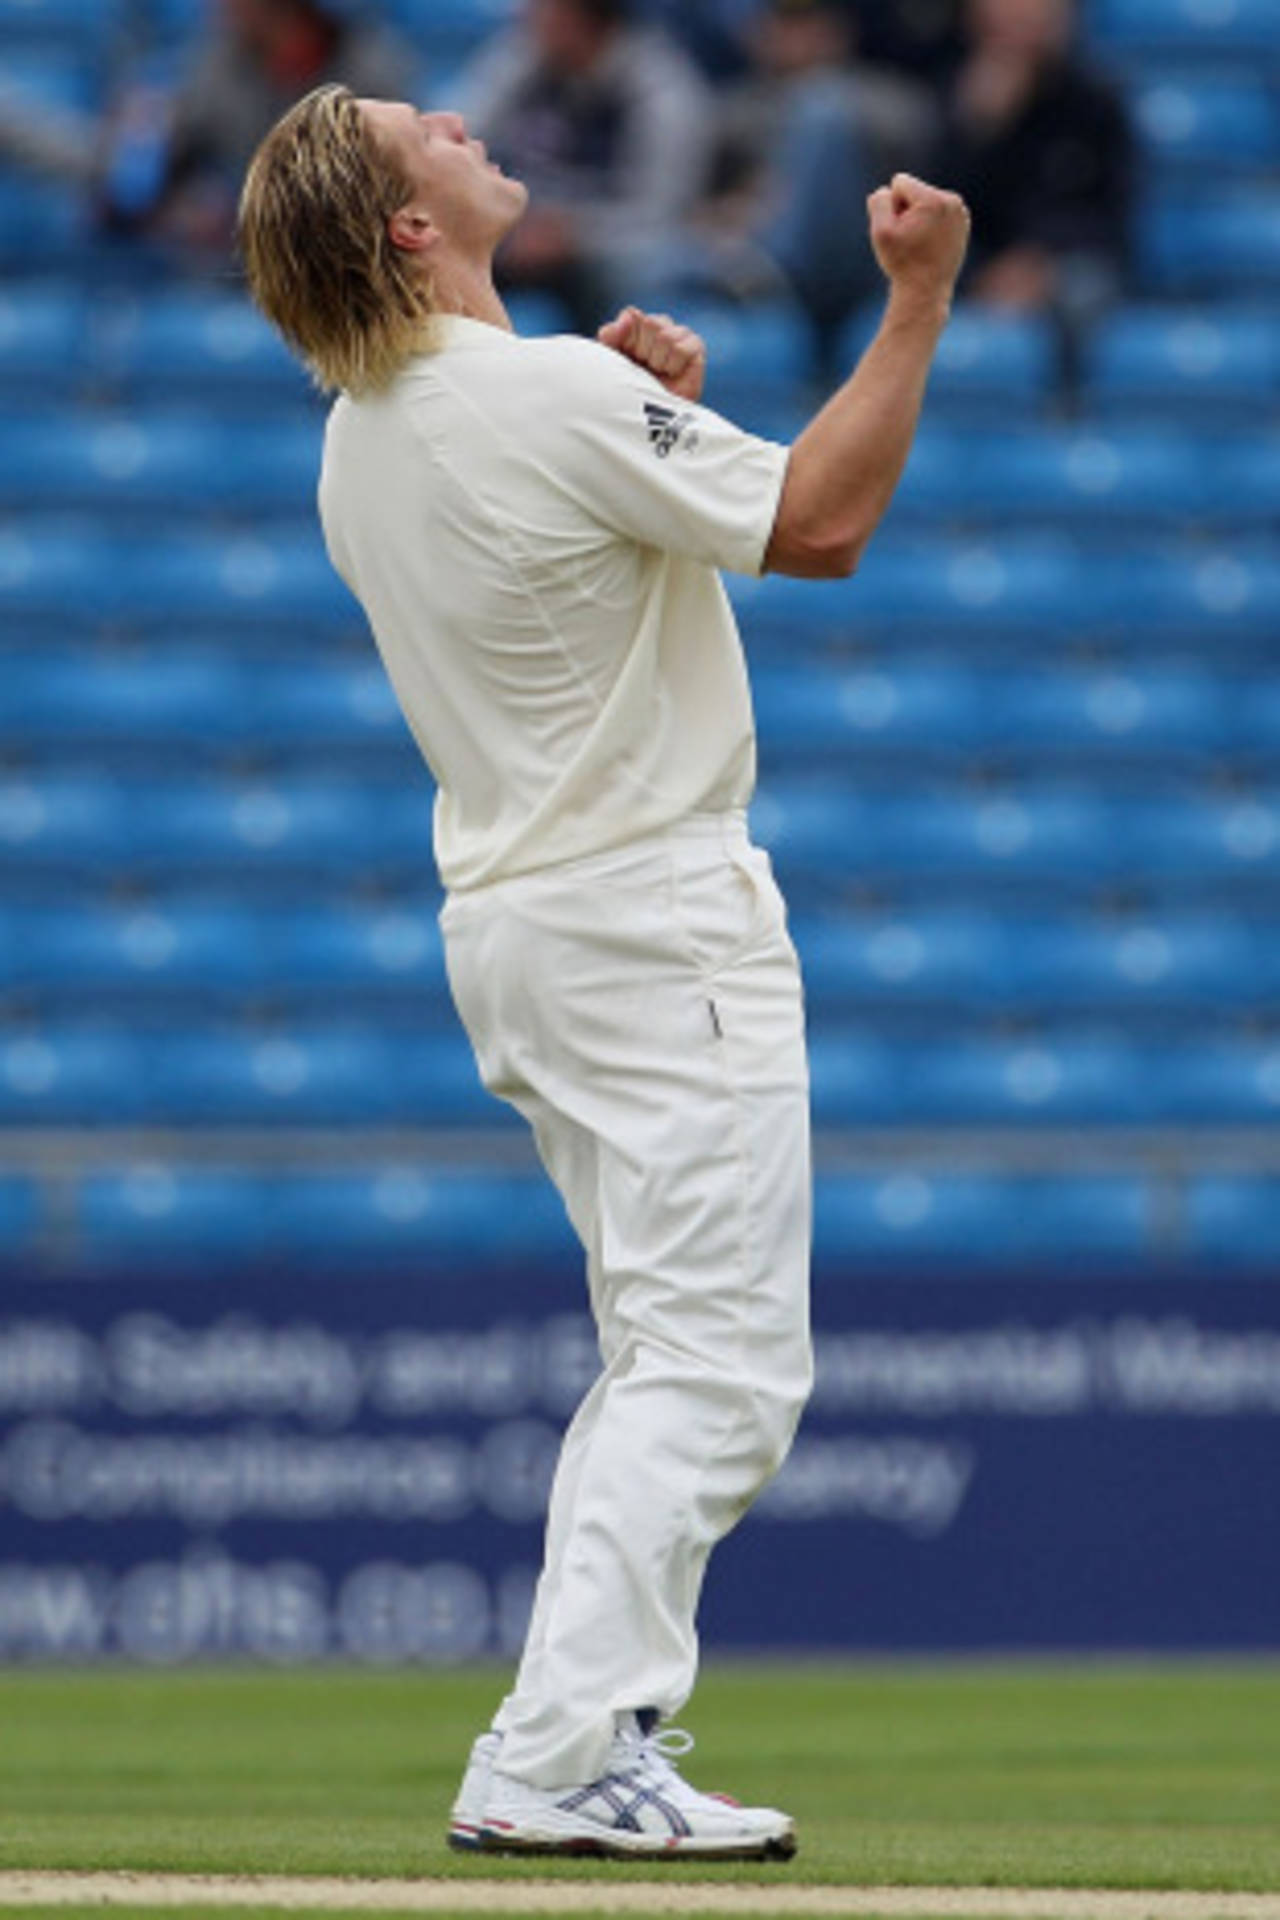 Shane Watson's impressive bowling form continued with a career-best 6 for 33, Pakistan v Australia, 2nd Test, Headingley, July 22, 2010